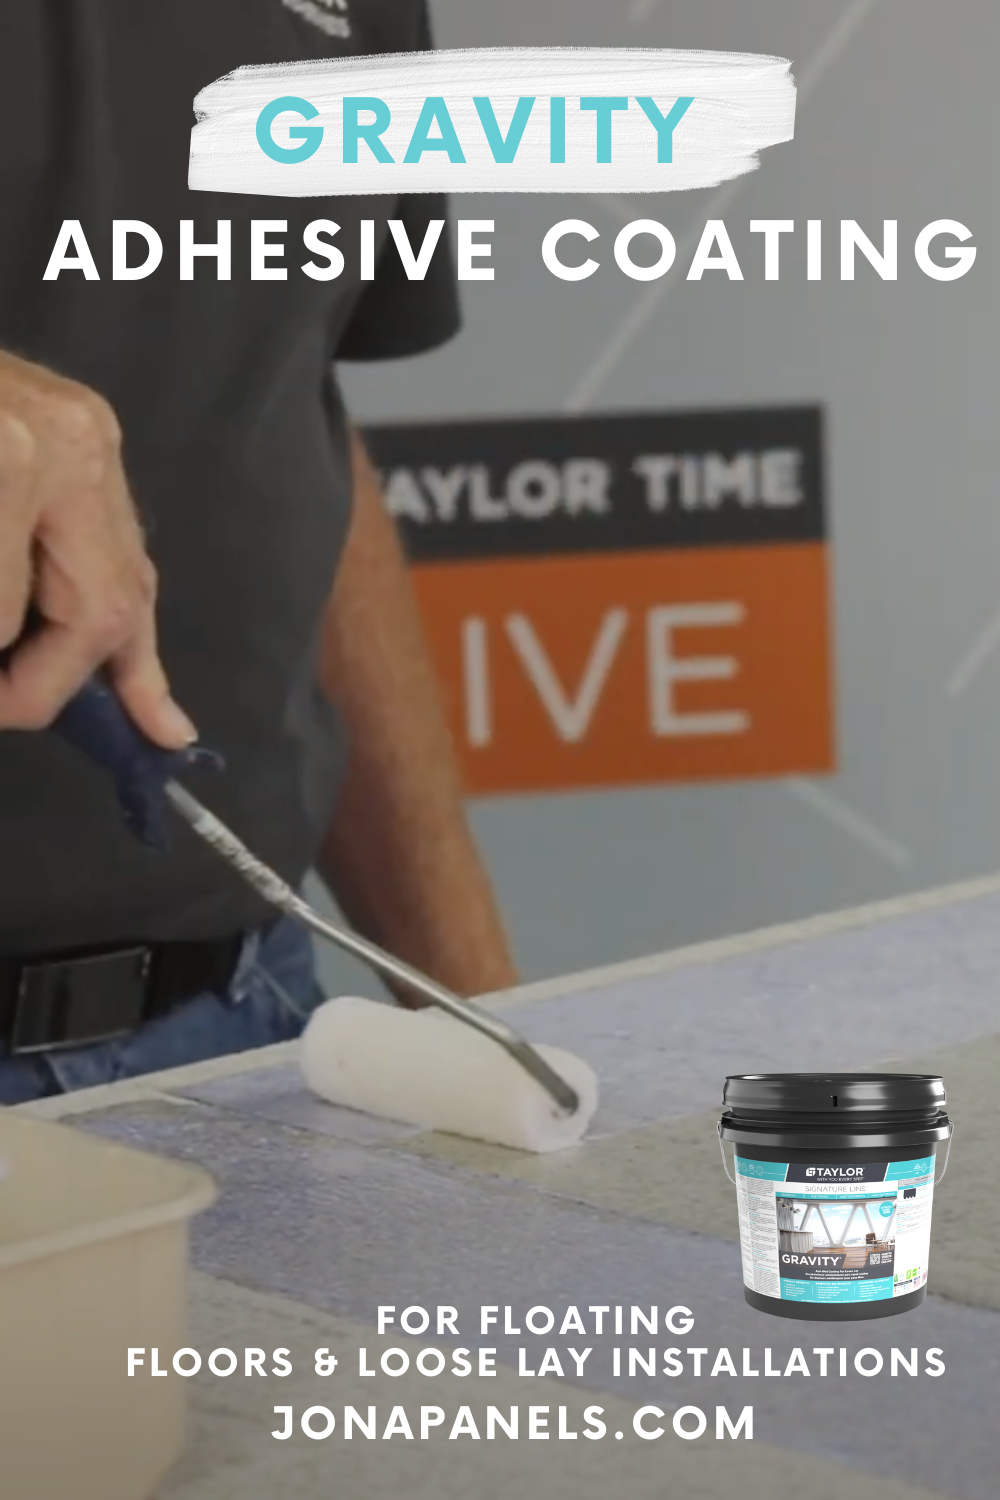 adhesive coating for floating floors and loose lay flooring installations